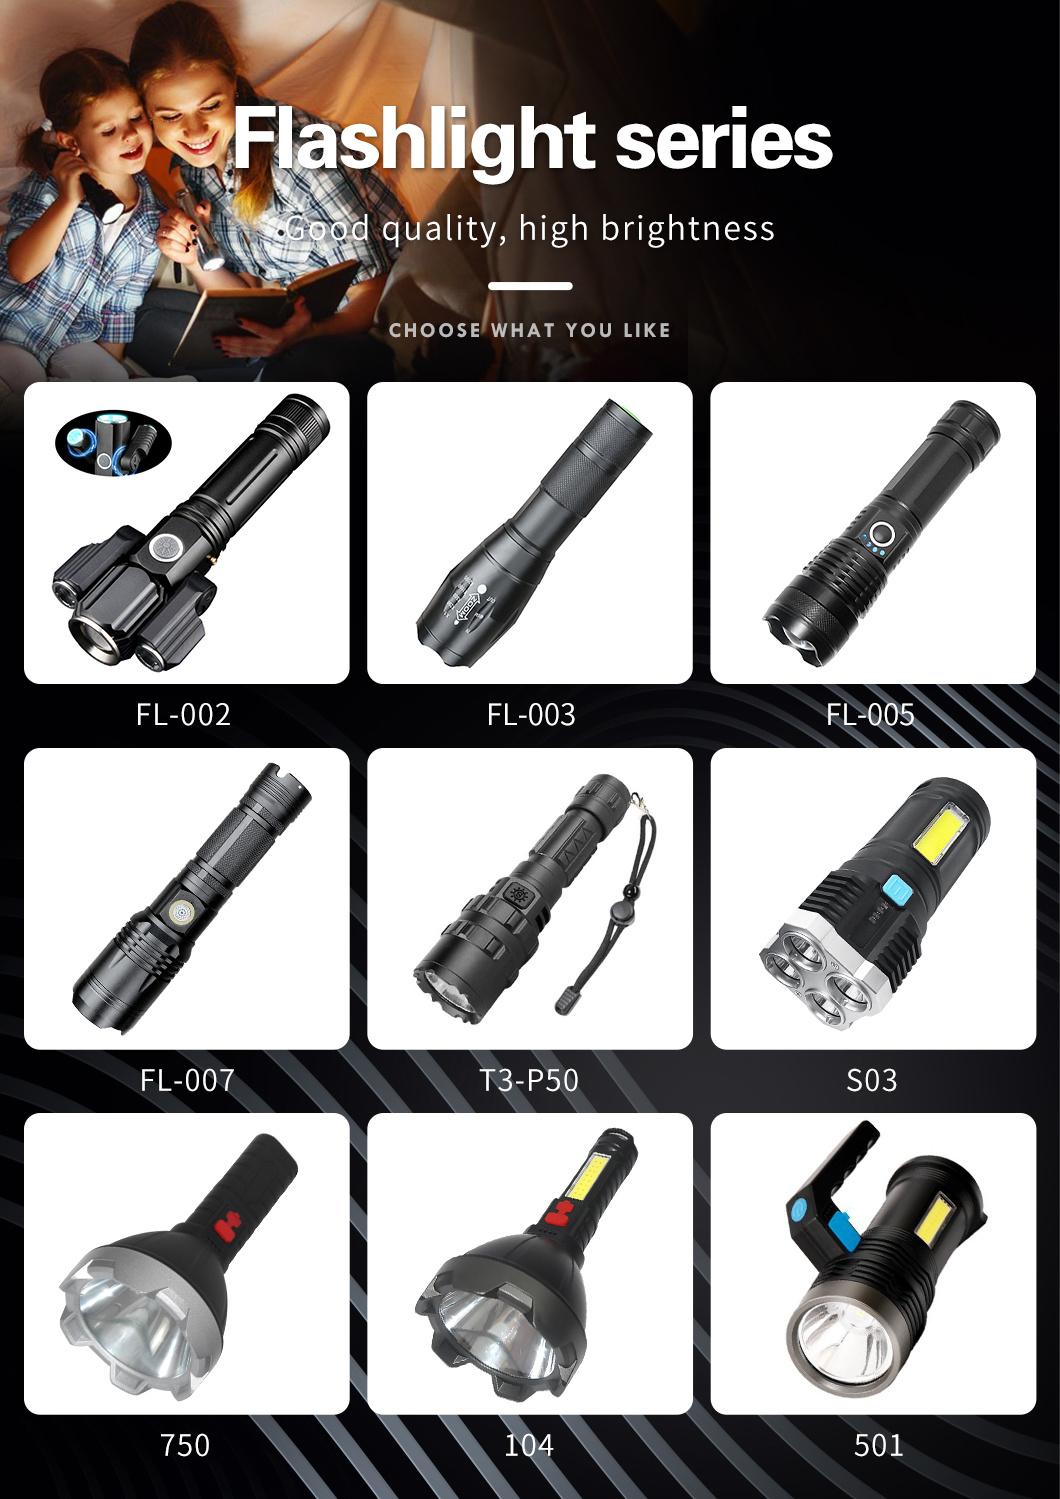 Rechargeable Multi-Function Escape Tool Emergency Flashlight, with Safety Hammer Belt Cutter and Alarm Speaker